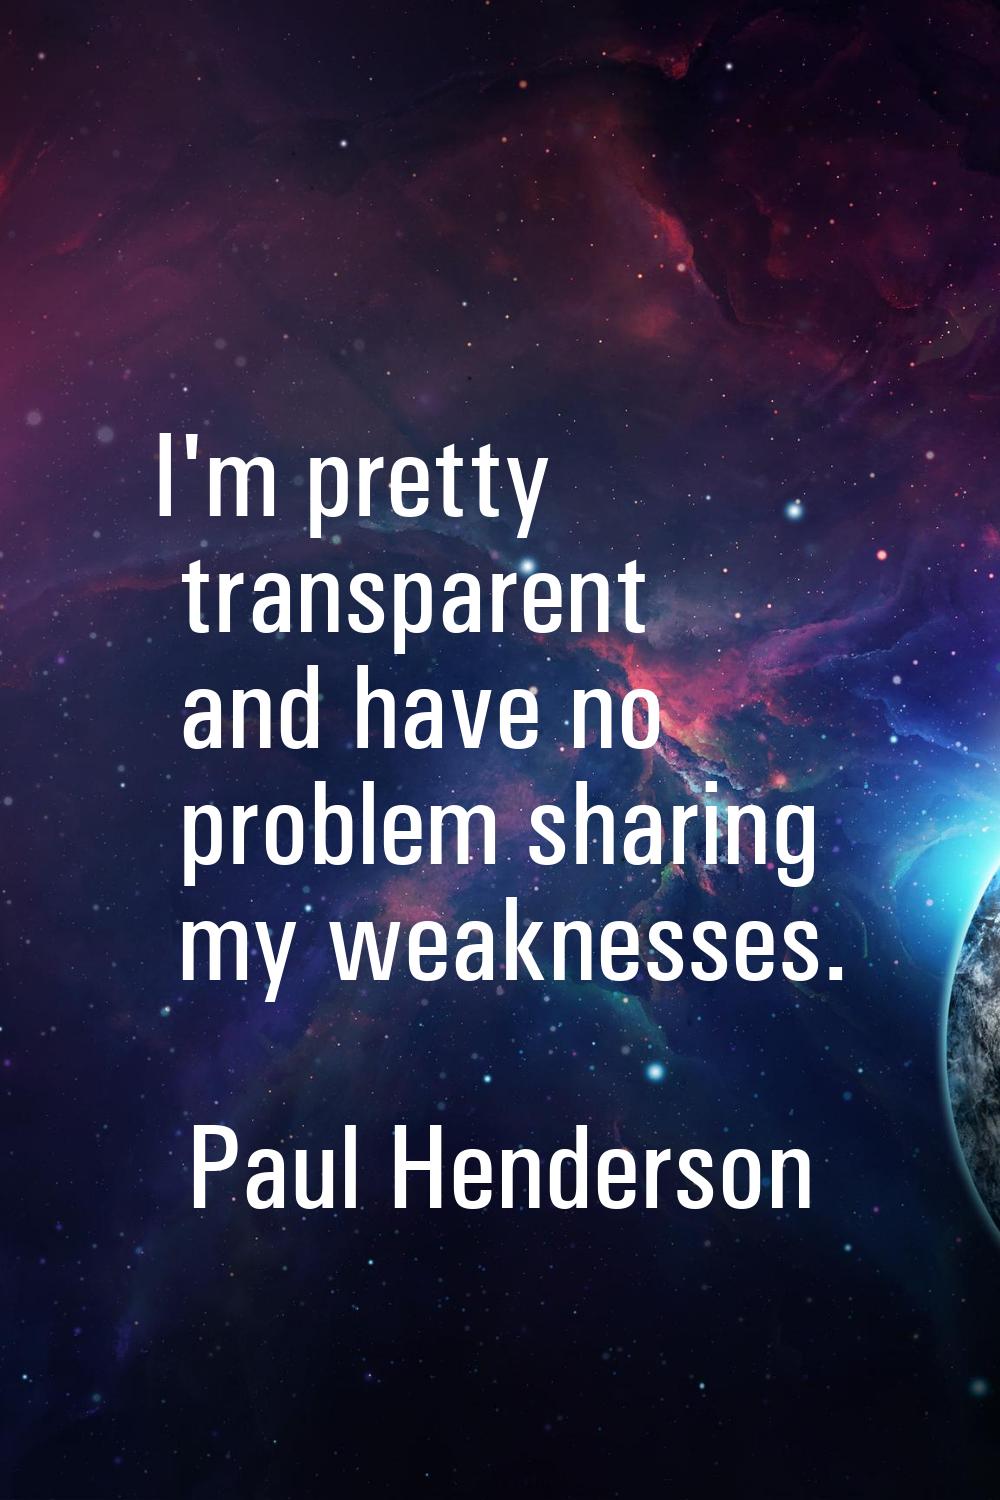 I'm pretty transparent and have no problem sharing my weaknesses.